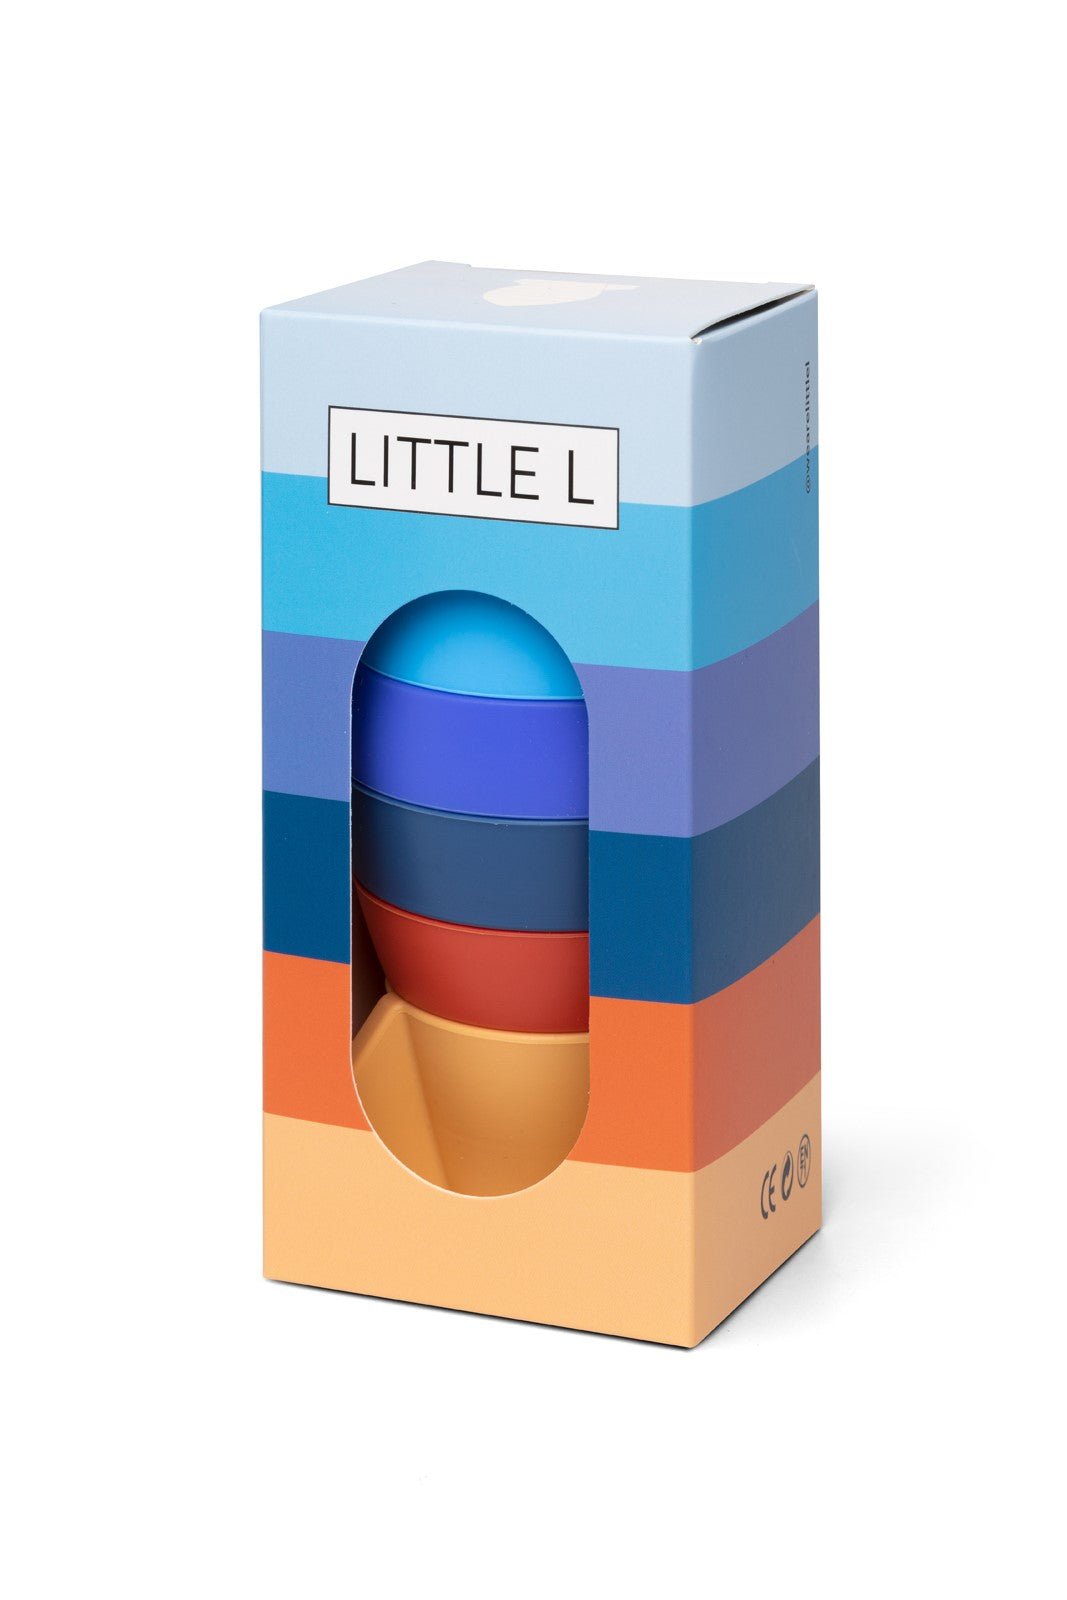 Little L Soft Toys - Spaceship Blues and Oranges - Playlaan